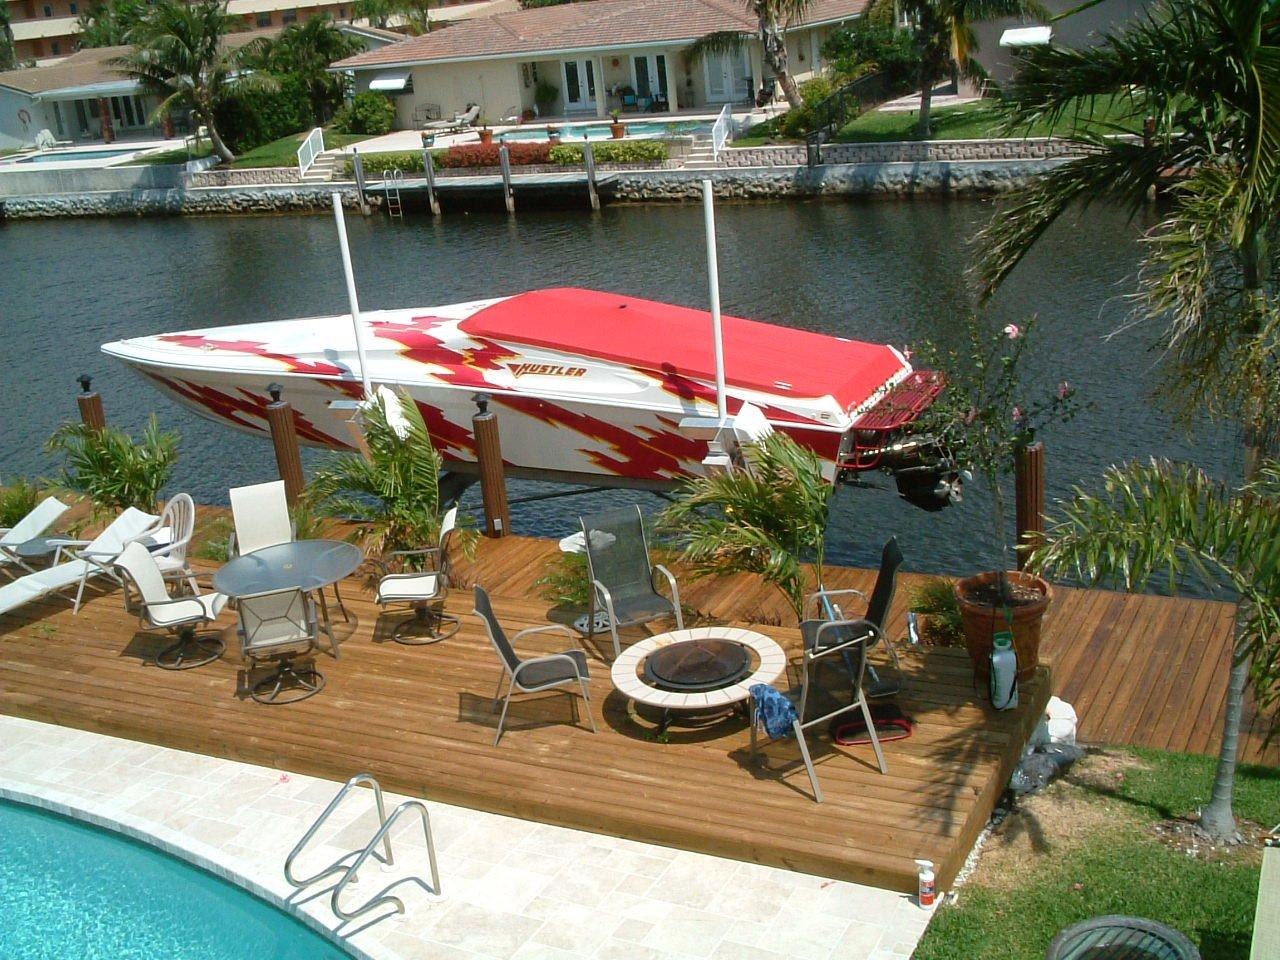 new dock, deck and 14,000 # elevator boatlift - all power